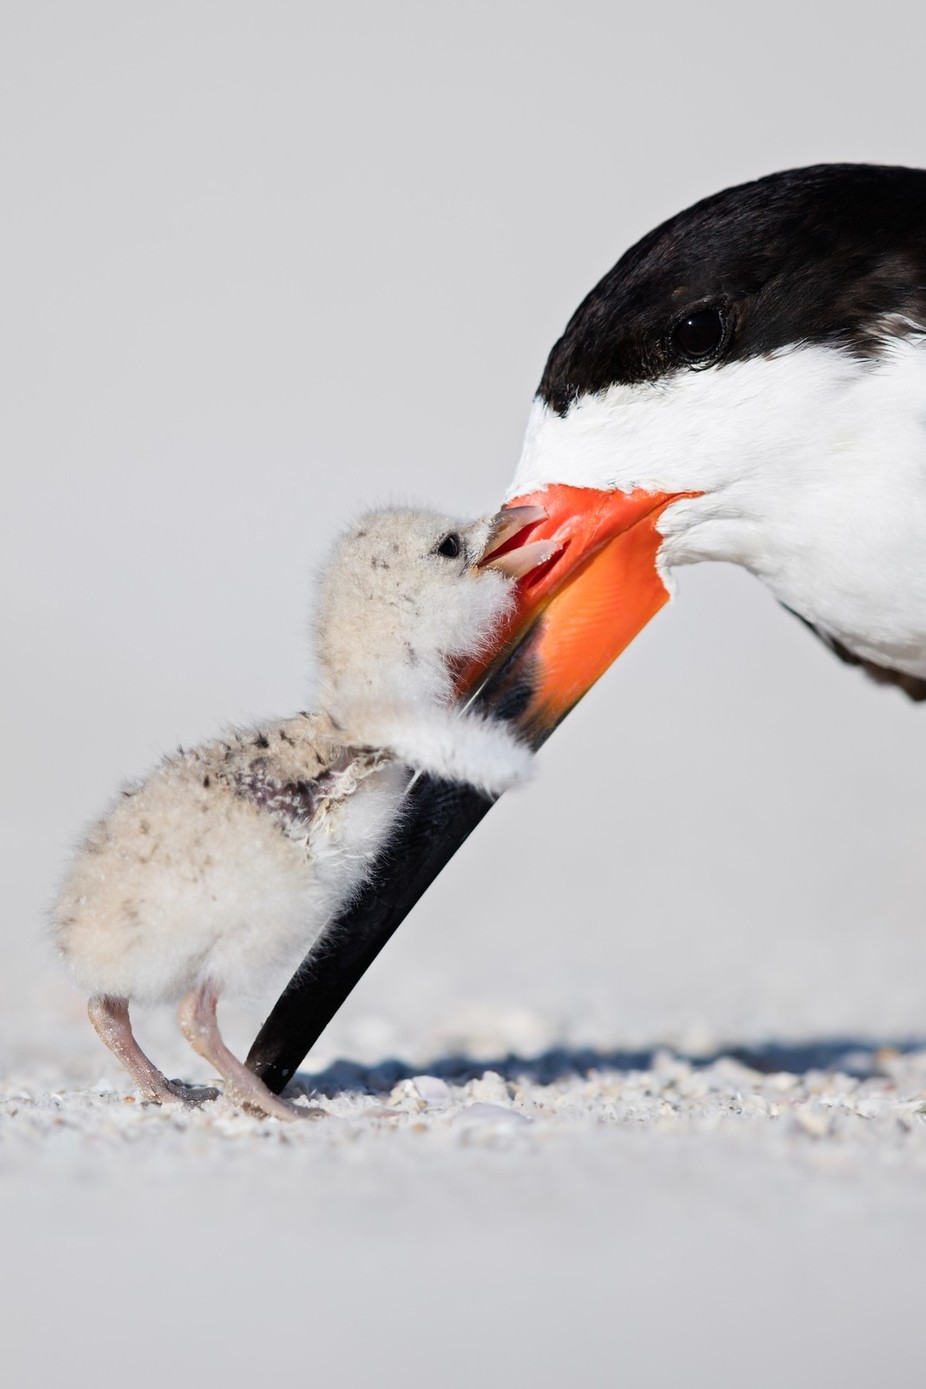 Black Skimmer by OutbackPhotoAdventures - Everything Nature Photo Contest